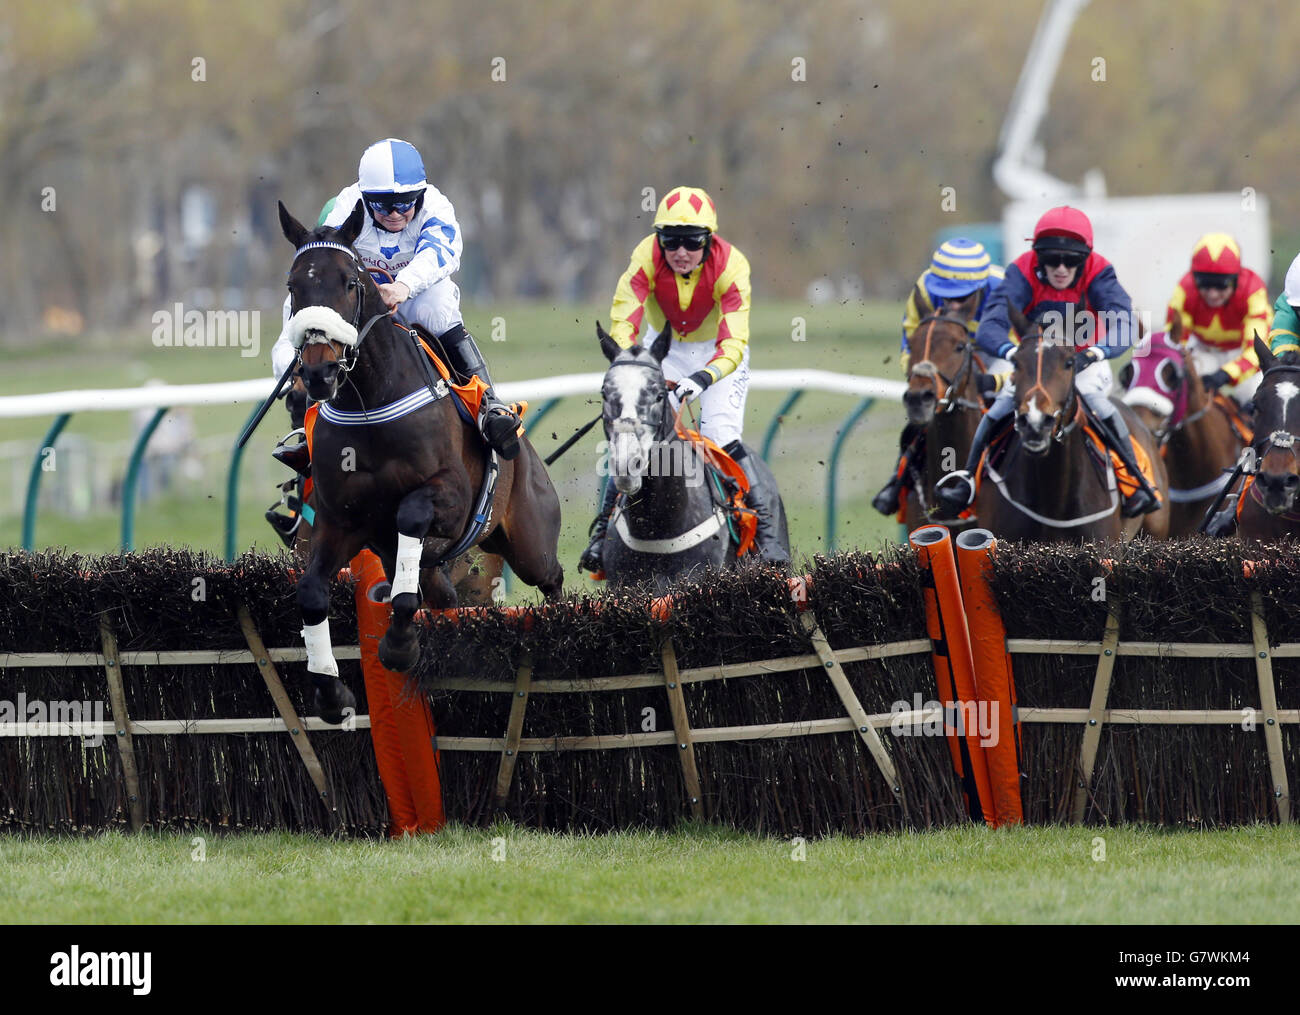 Aristo Du Plessis ridden by jockey Dale Irving goes on to win the QTS Handicap Hurdle Race during the 2015 Coral Scottish Grand National Festival at Ayr Racecourse. Stock Photo